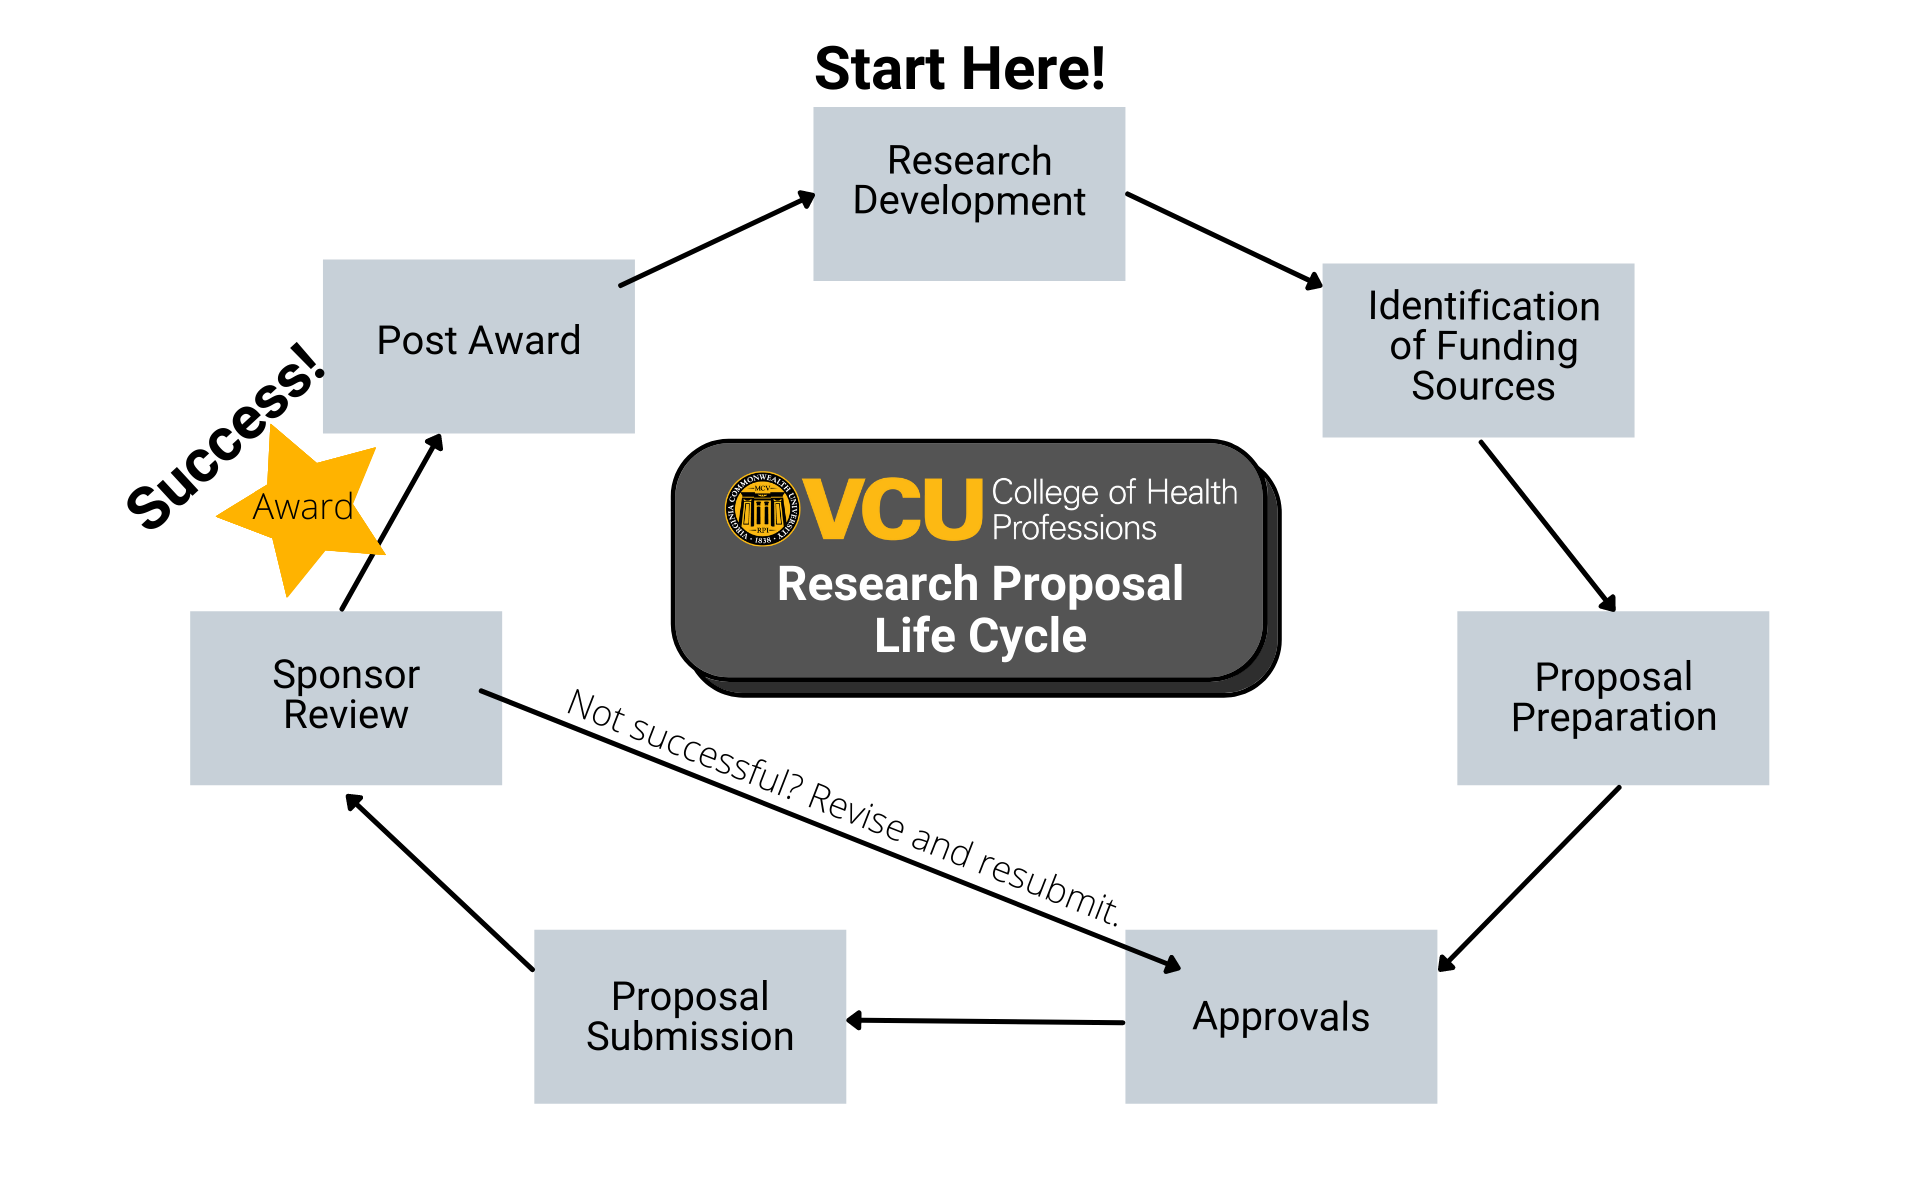 Research Proposal Life Cycle - Research Development, Identification of Funding Sources, Proposal Preparation, Approvals, Proposal Submission, Sponsor Review, Post Award